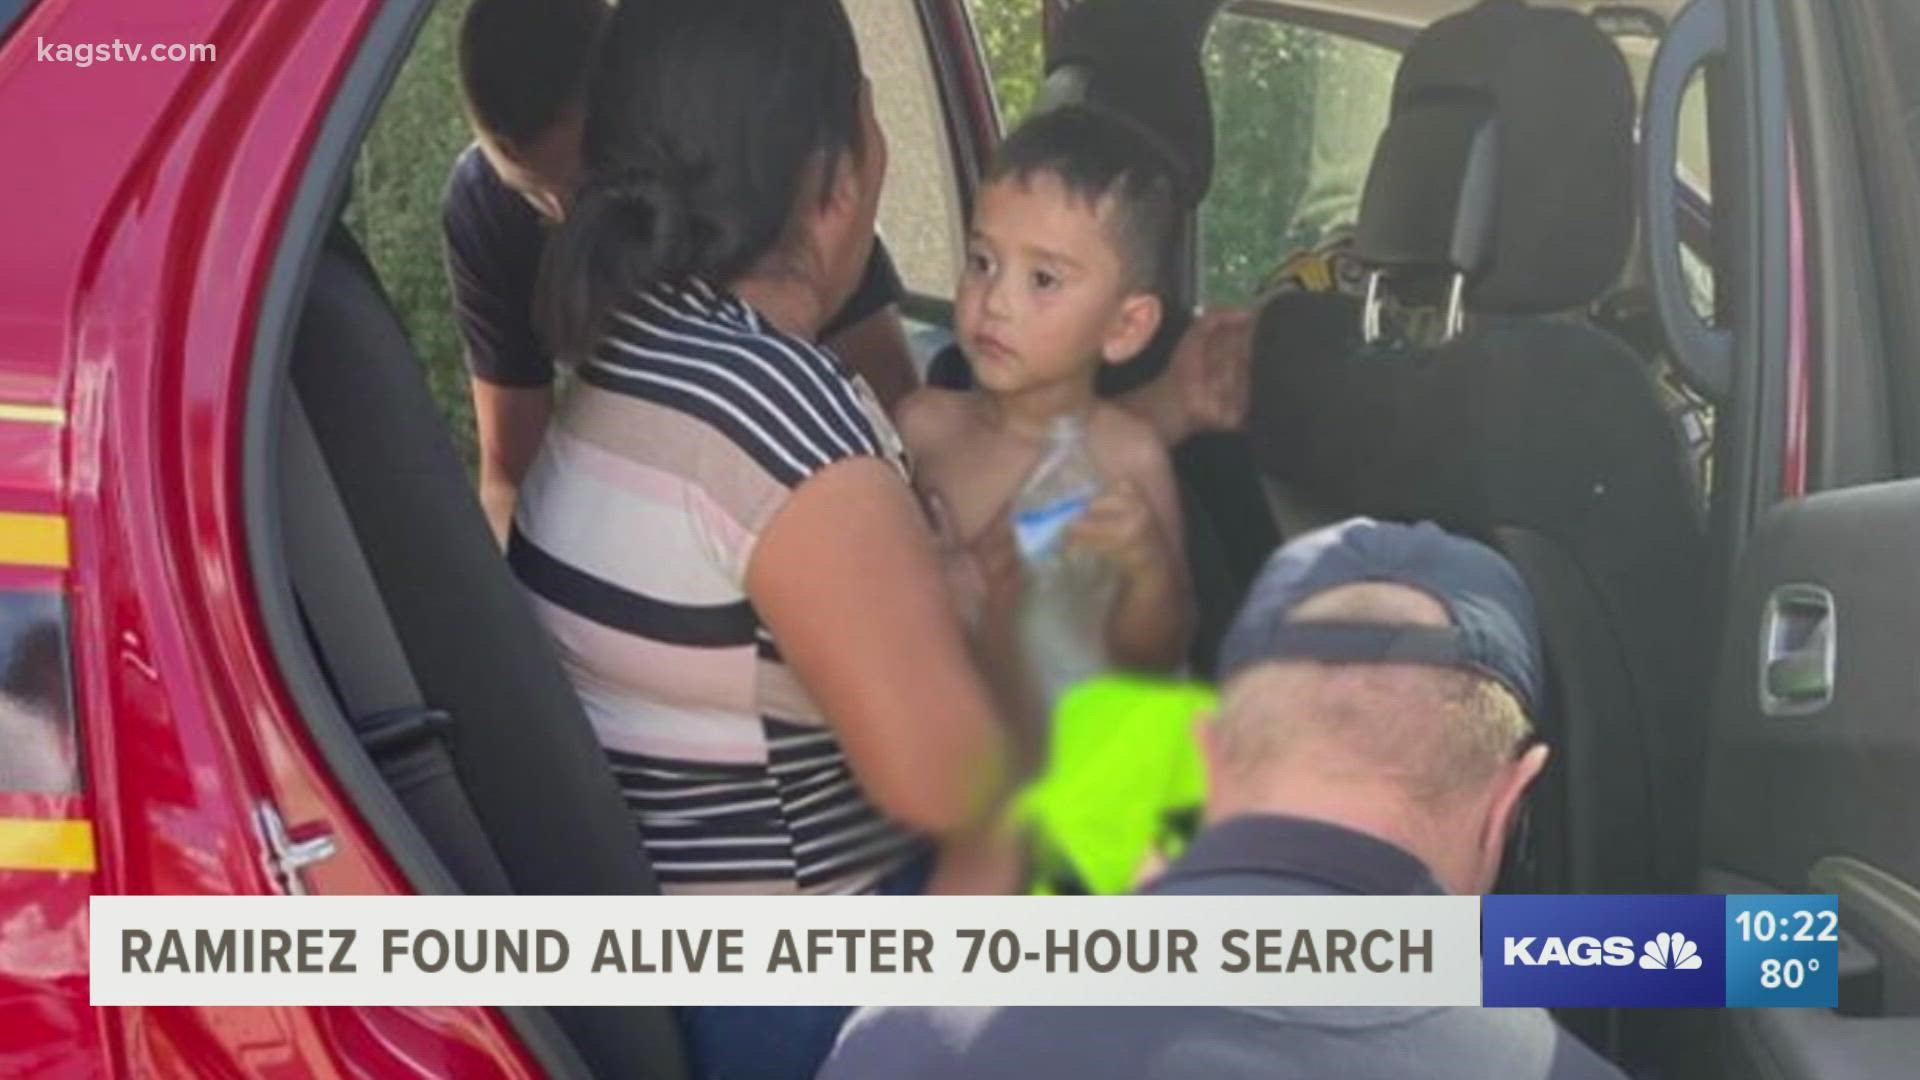 After nearly four days, Christopher Ramirez, 3, has been found. Here's a summary of the ordeal.